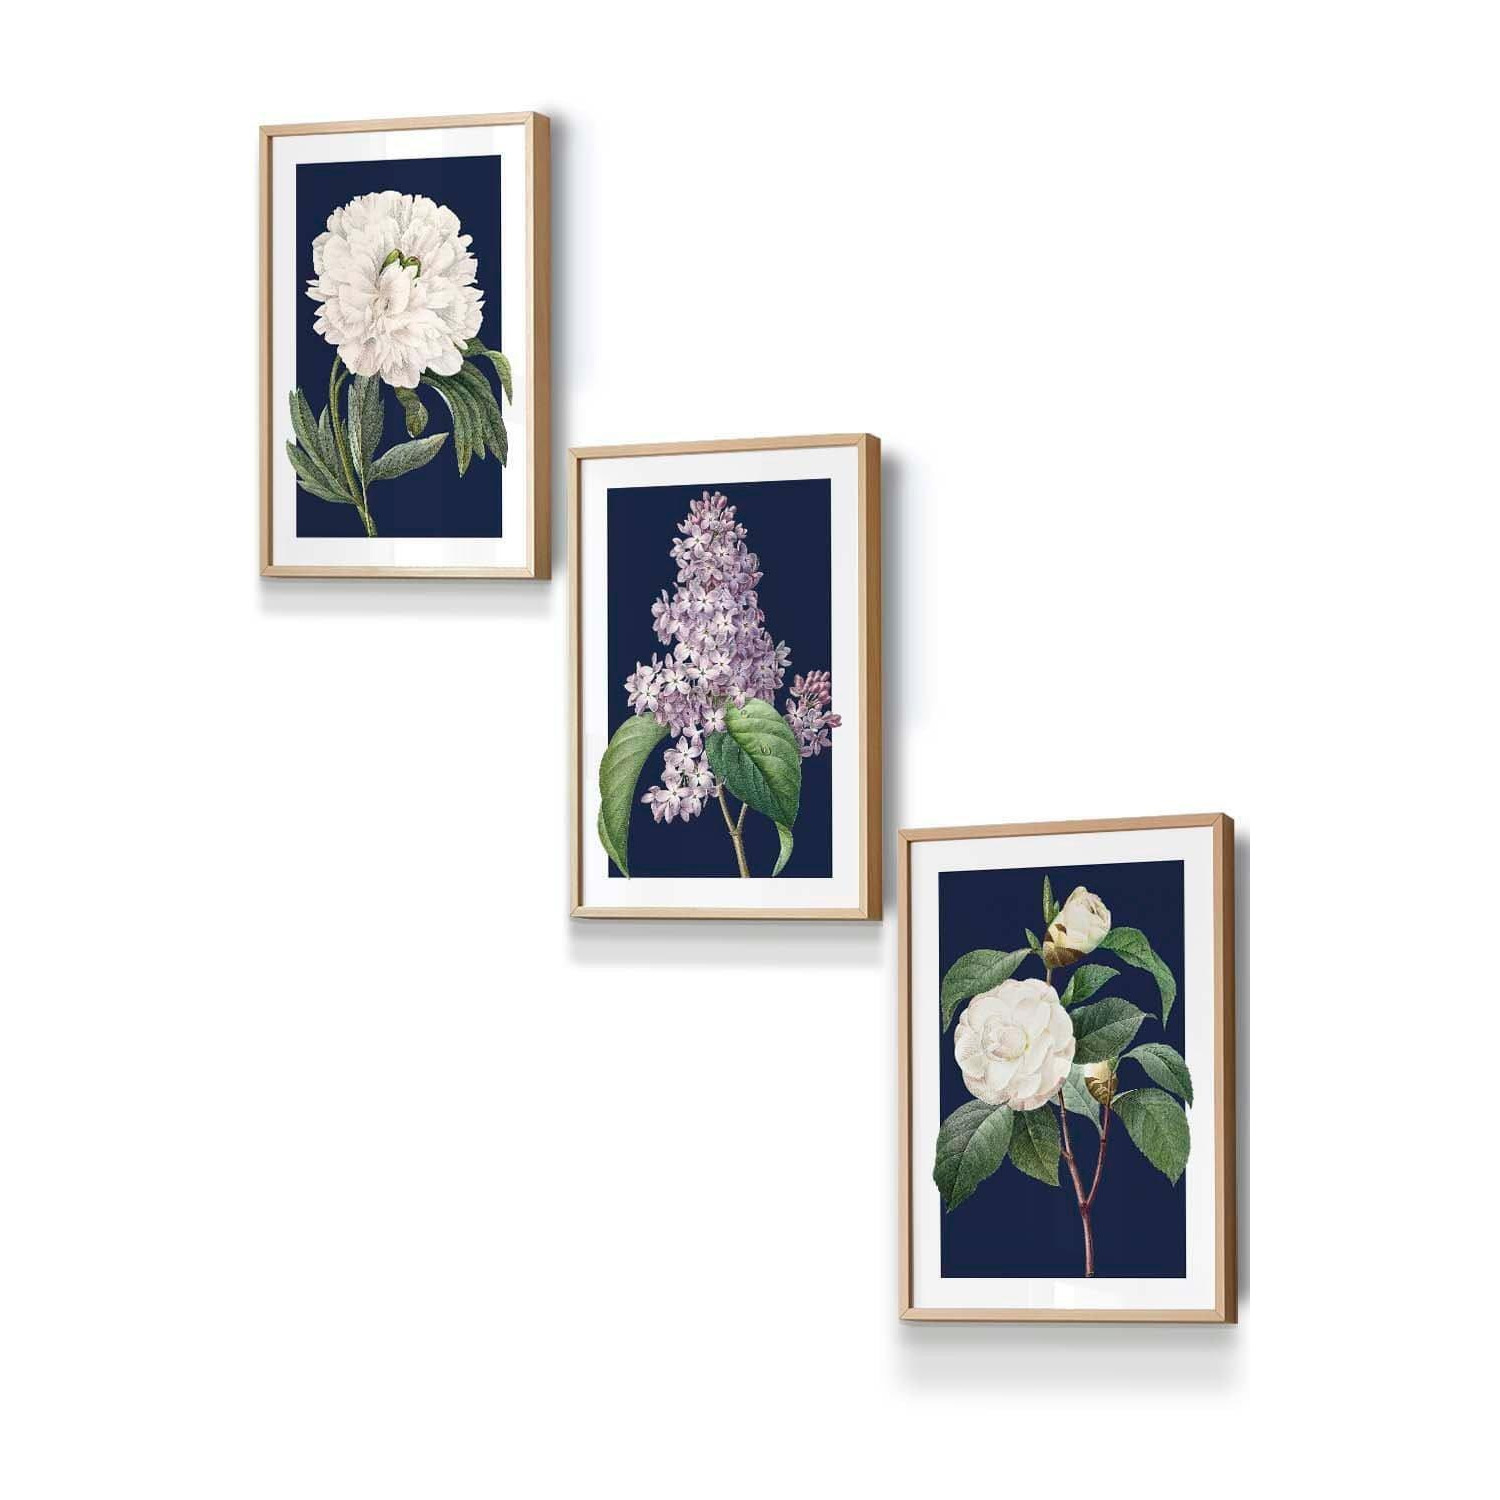 Set of 3 Oak Framed Vintage Flowers Lilac, Peony and Camellia on Navy Blue Wall Art - image 1